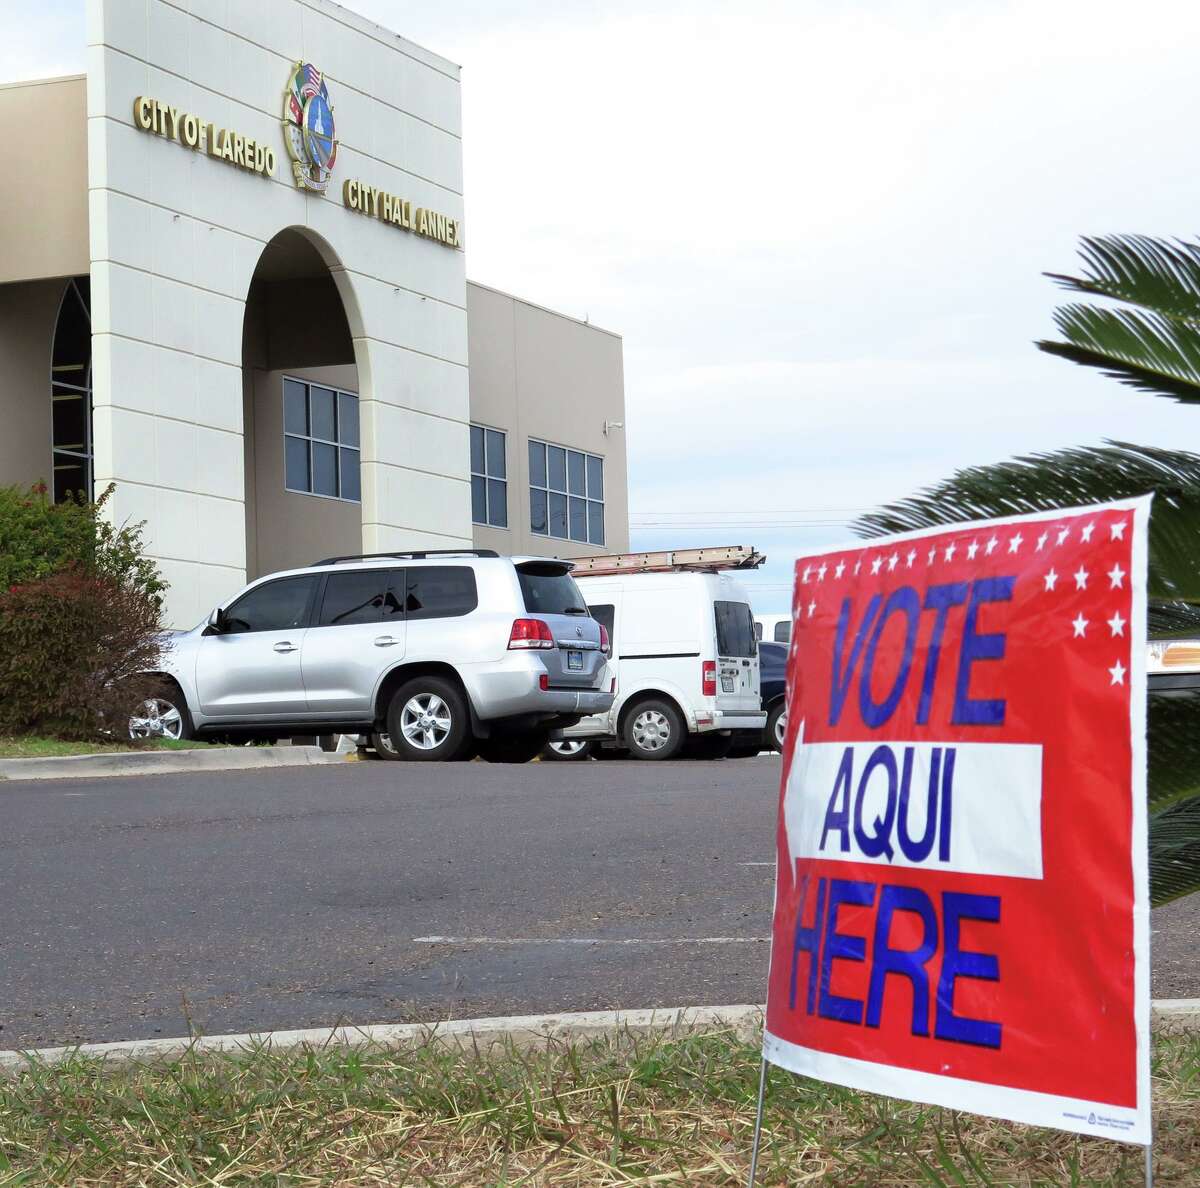 Local officials said there are 143,309 registered voters in Webb County, and they are expecting the highest voter turnout in years for the upcoming election.